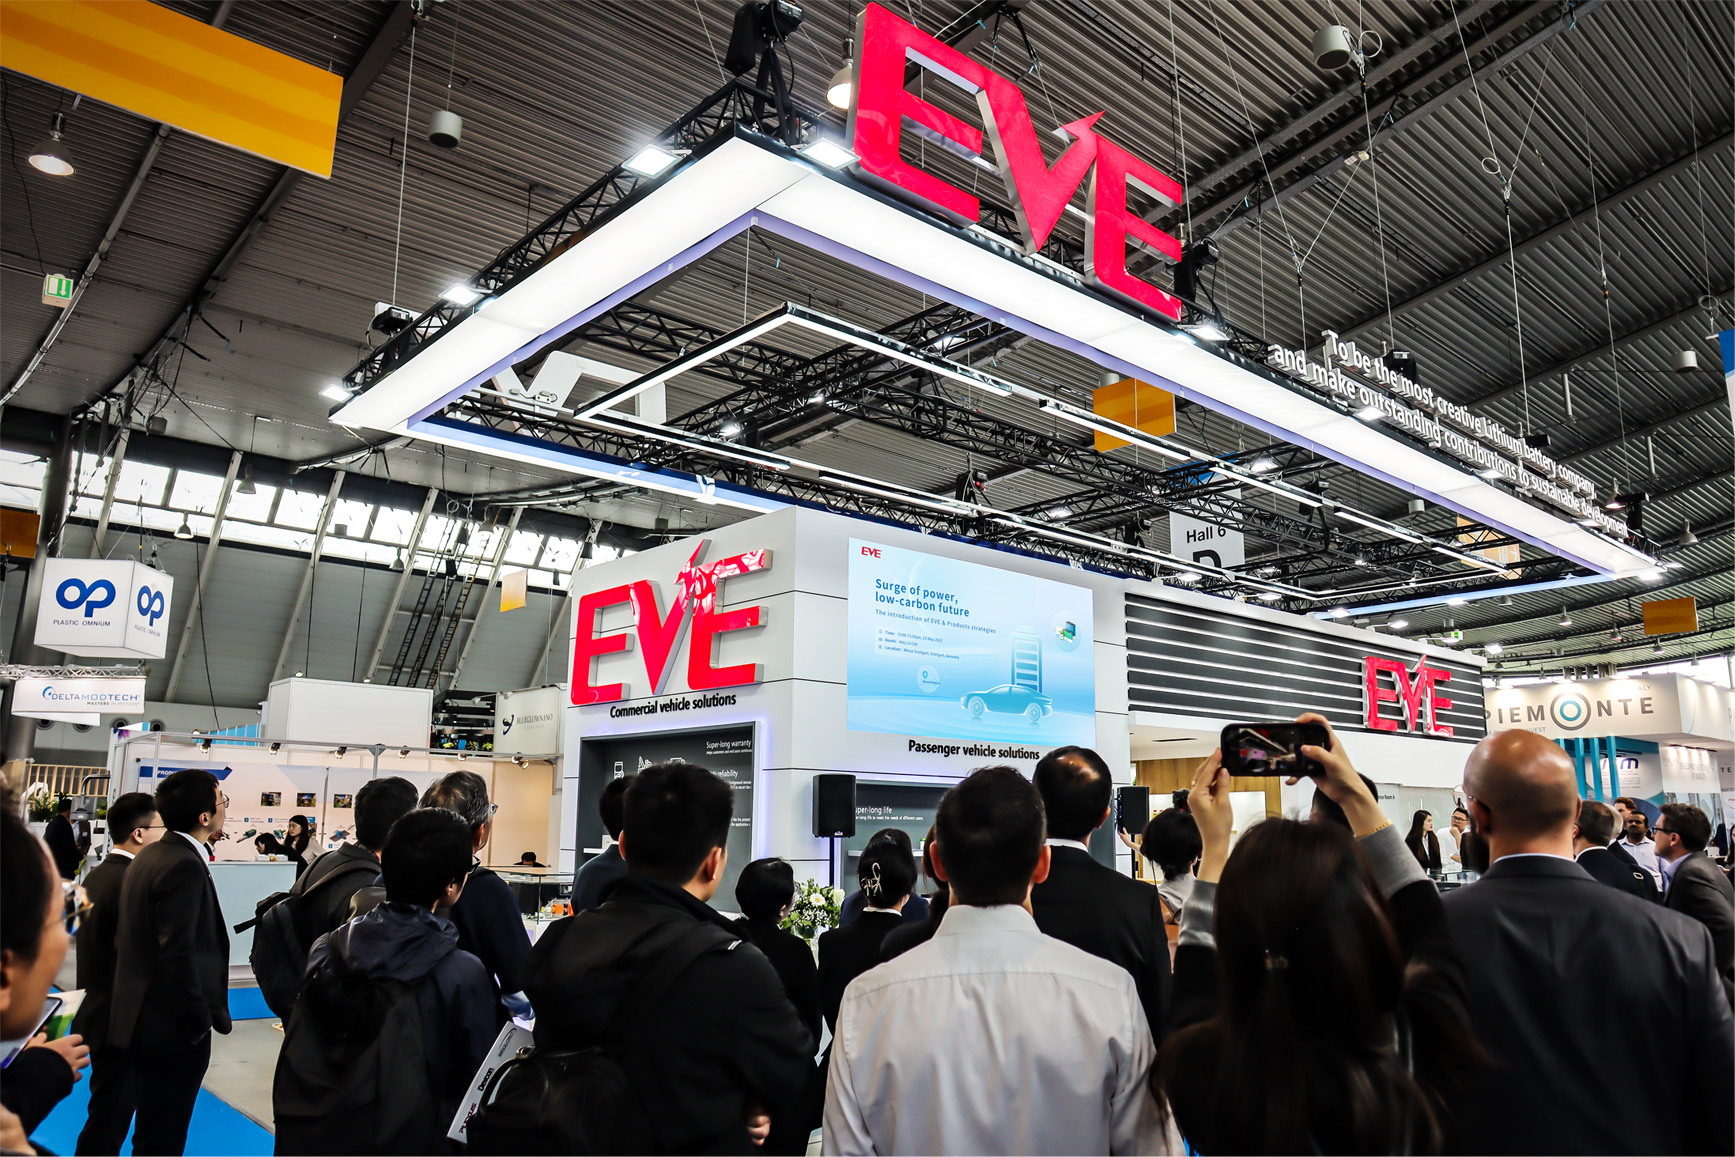 EVE Energy’s booth attracted lots of attendees.